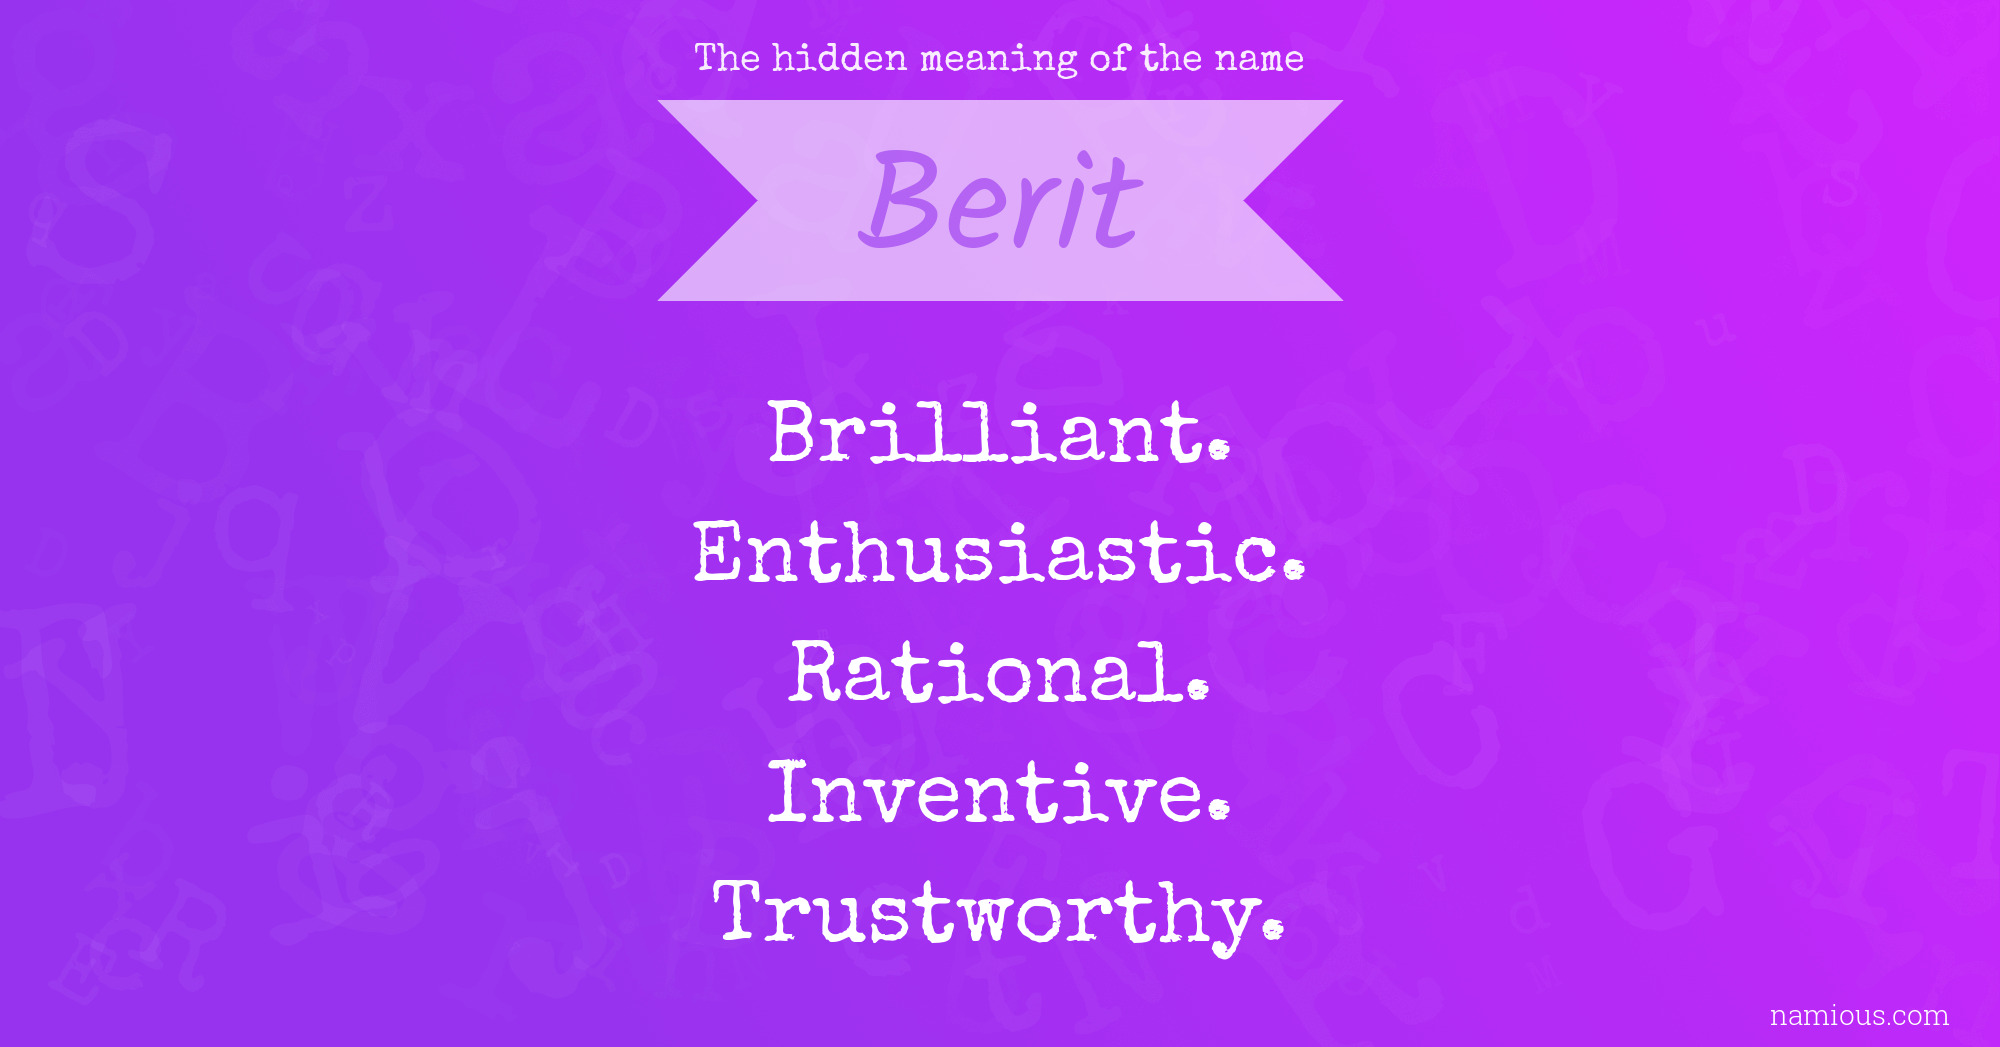 The hidden meaning of the name Berit